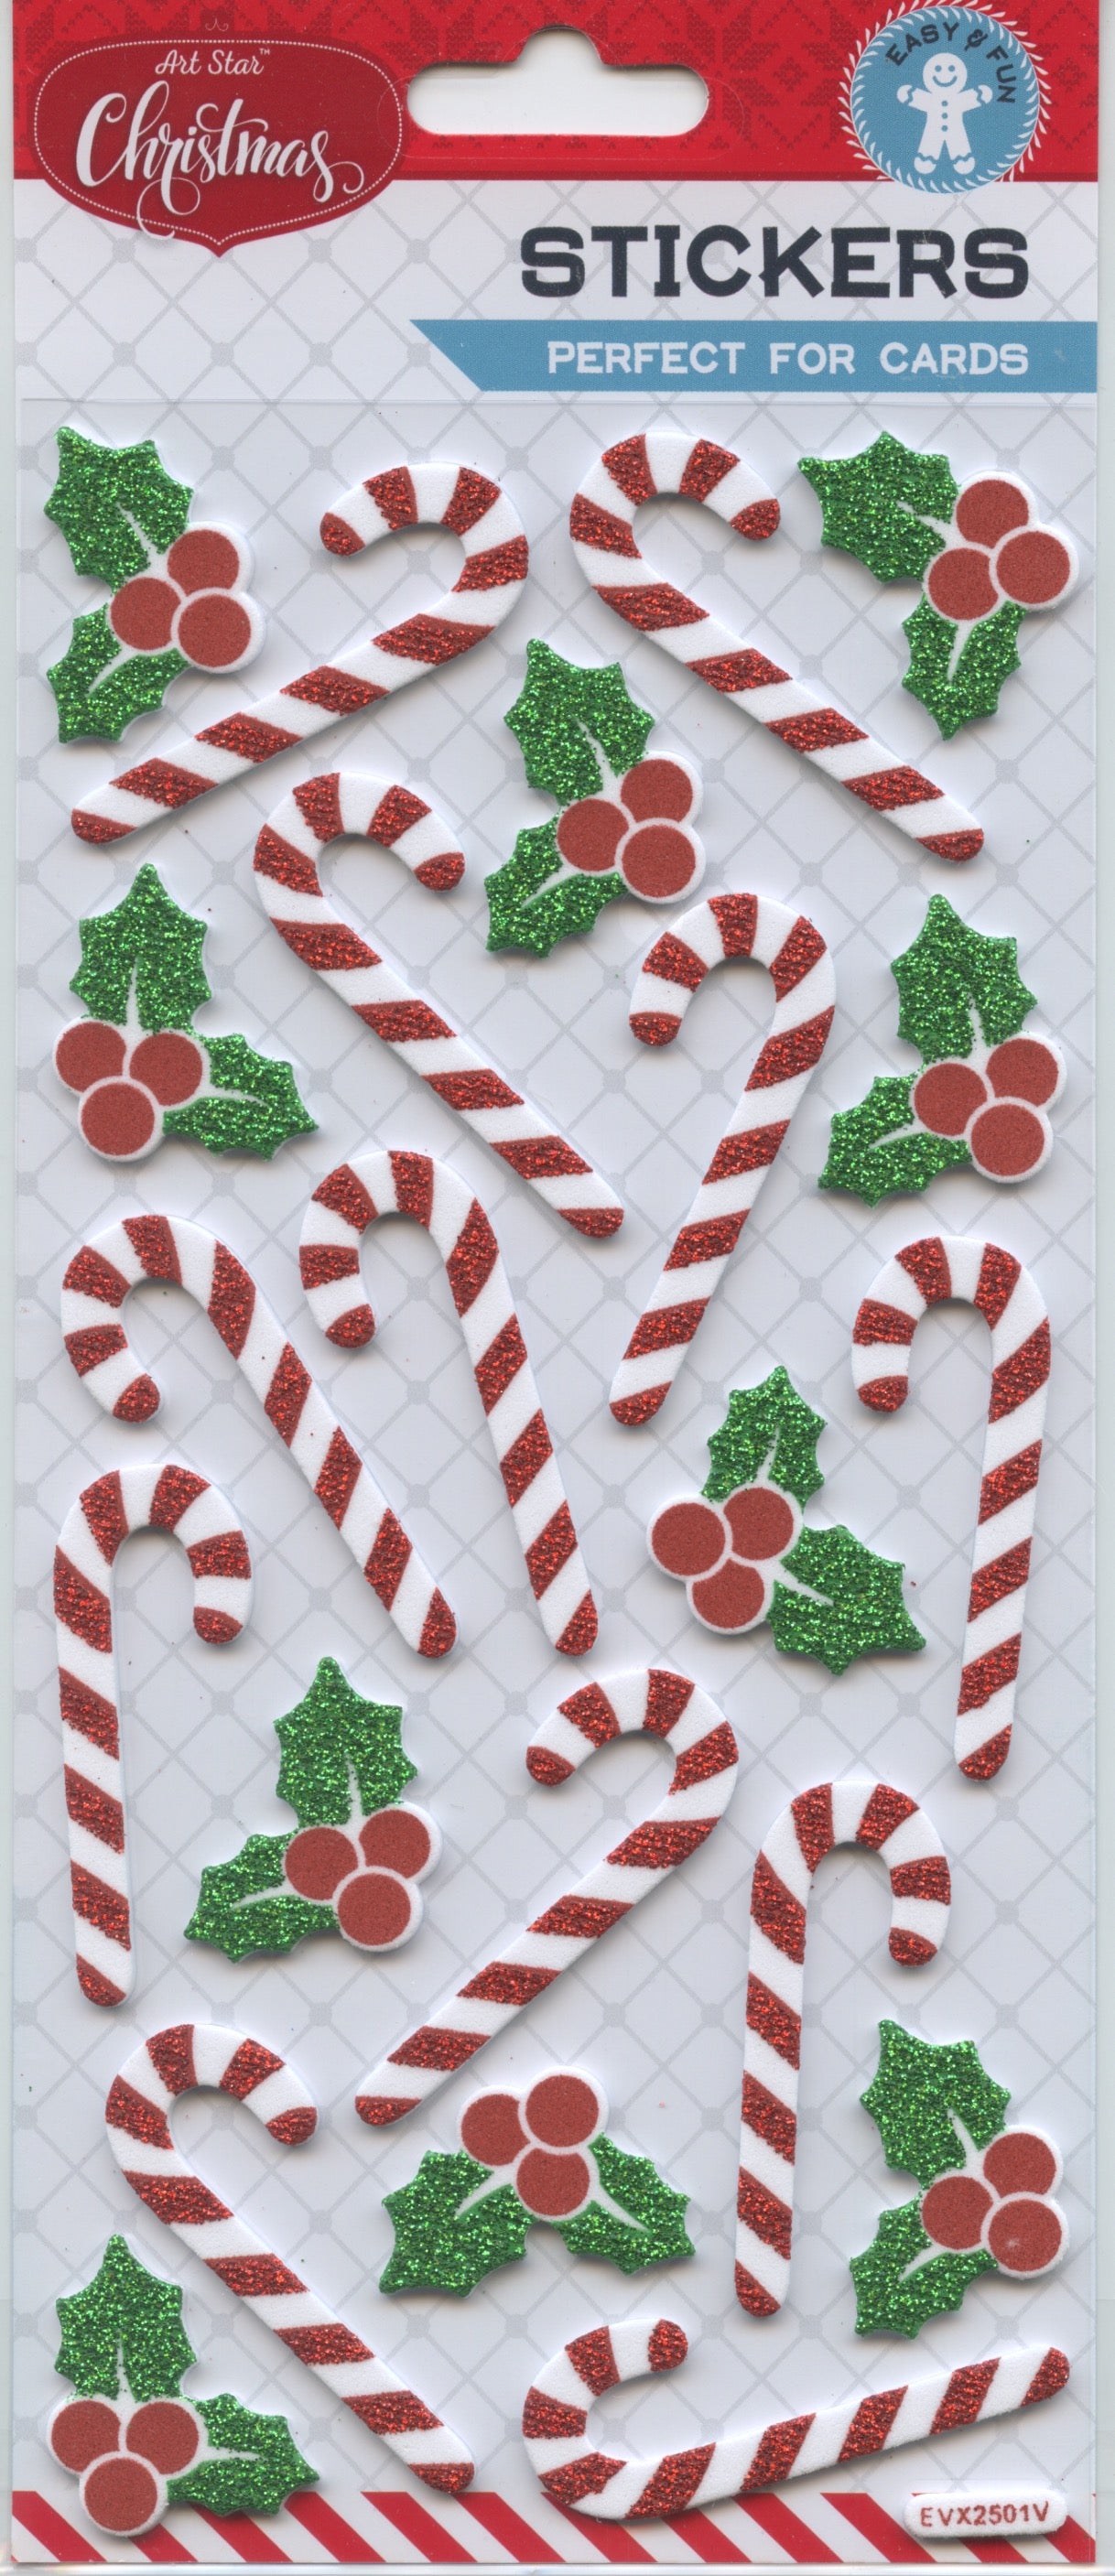 Art Star Christmas Stickers Foam Candy Cane / Holly 22pk